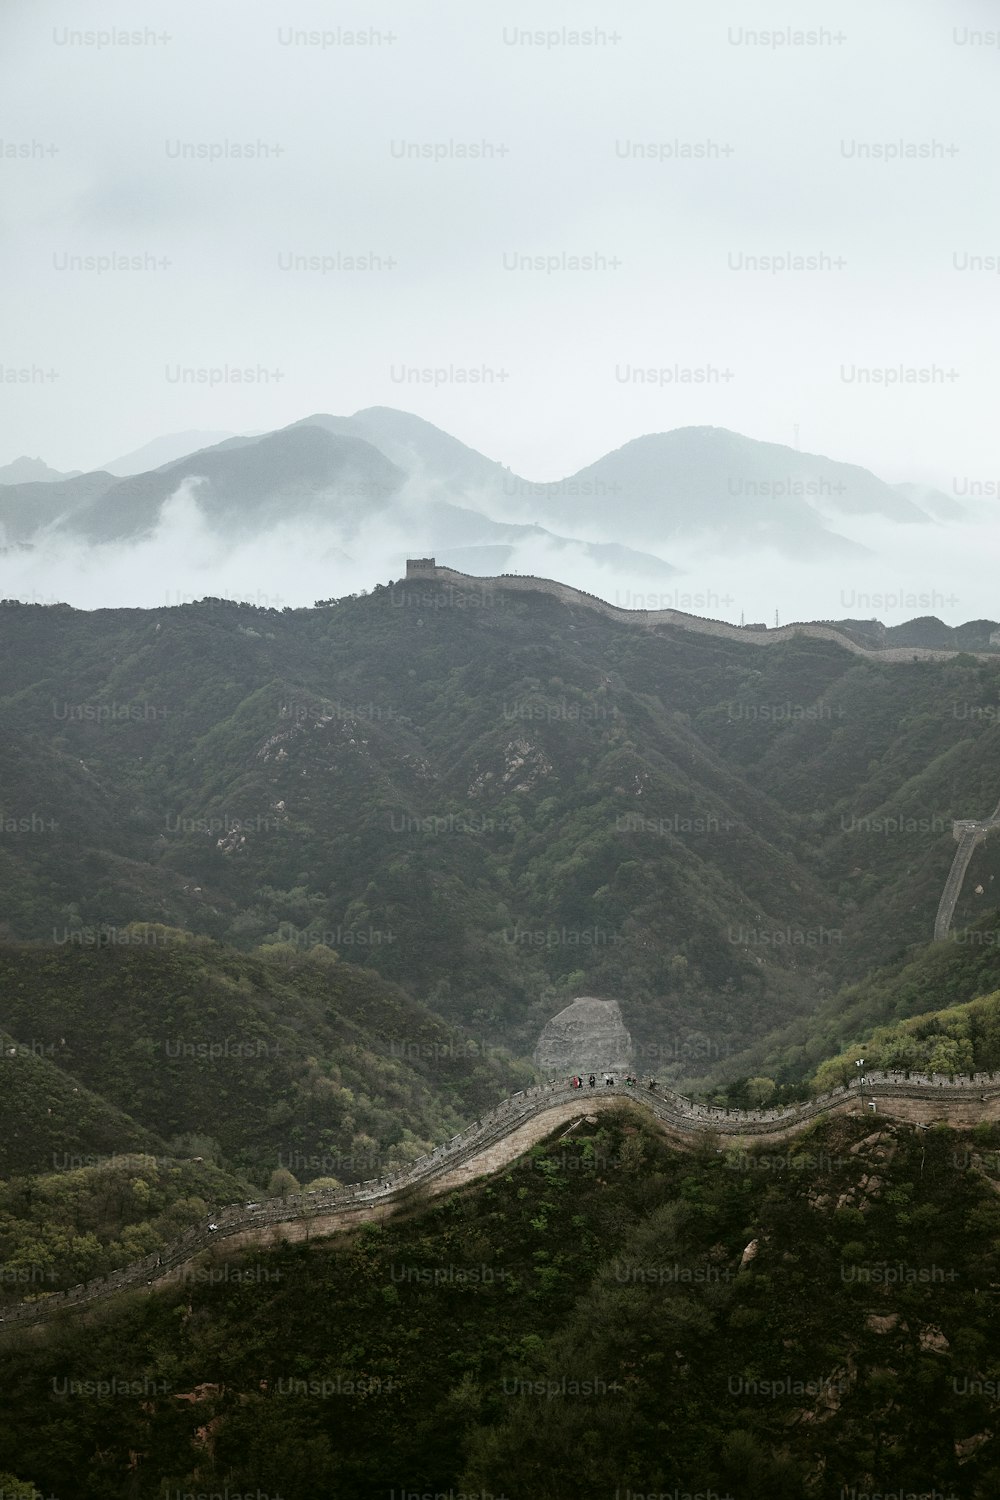 a view of the great wall of china